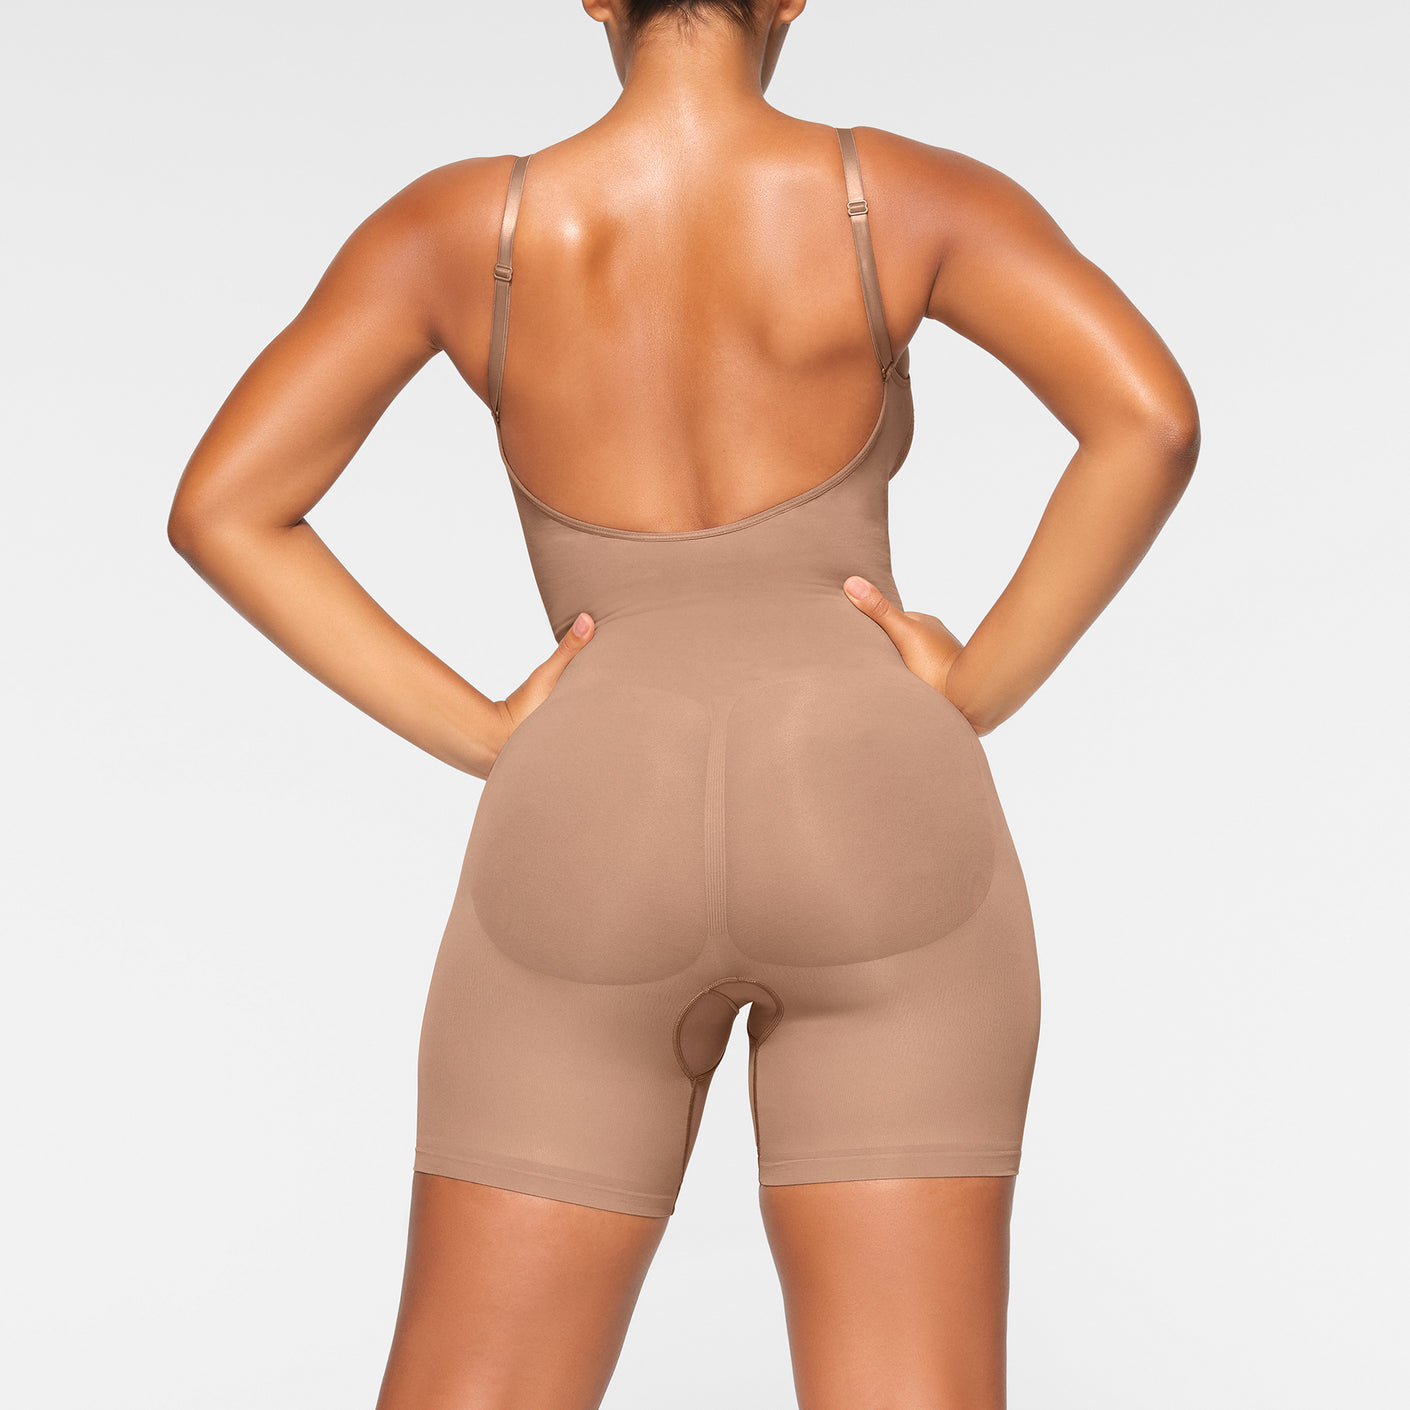 New Look's £13 bodysuit rivals SKIMS shapewear – and at a fraction of the  price - Netmums Reviews